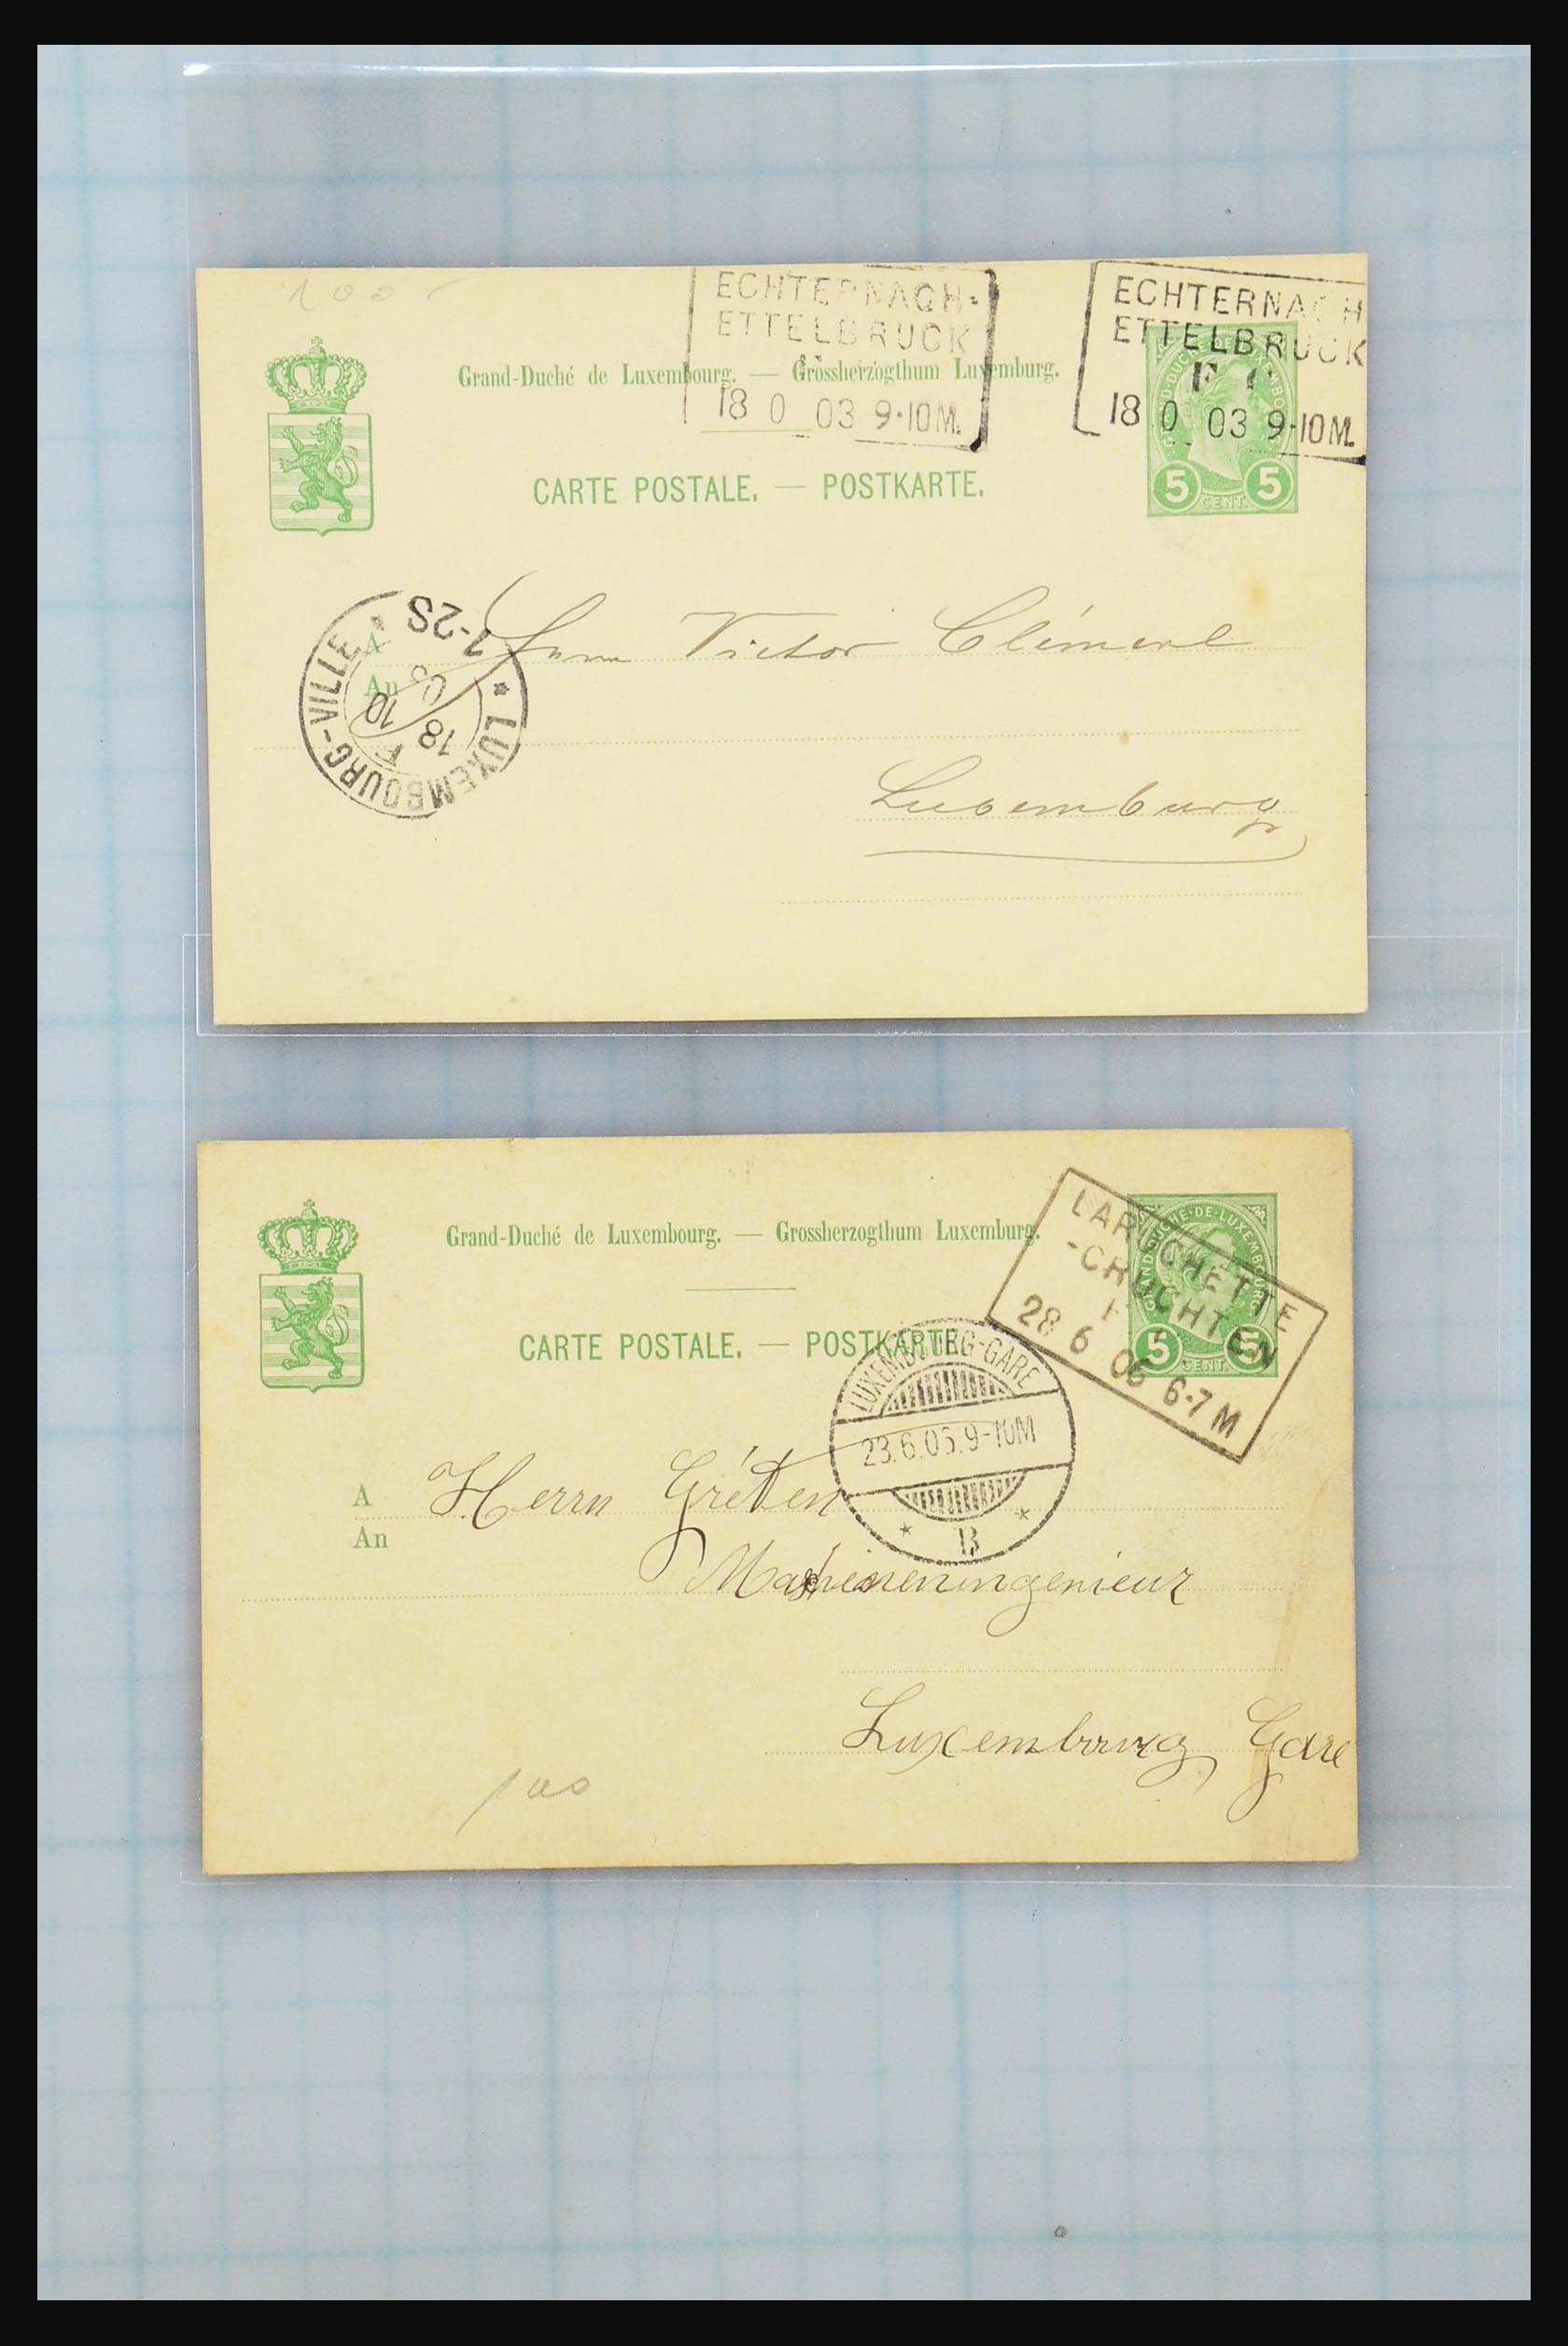 31358 054 - 31358 Portugal/Luxemburg/Greece covers 1880-1960.